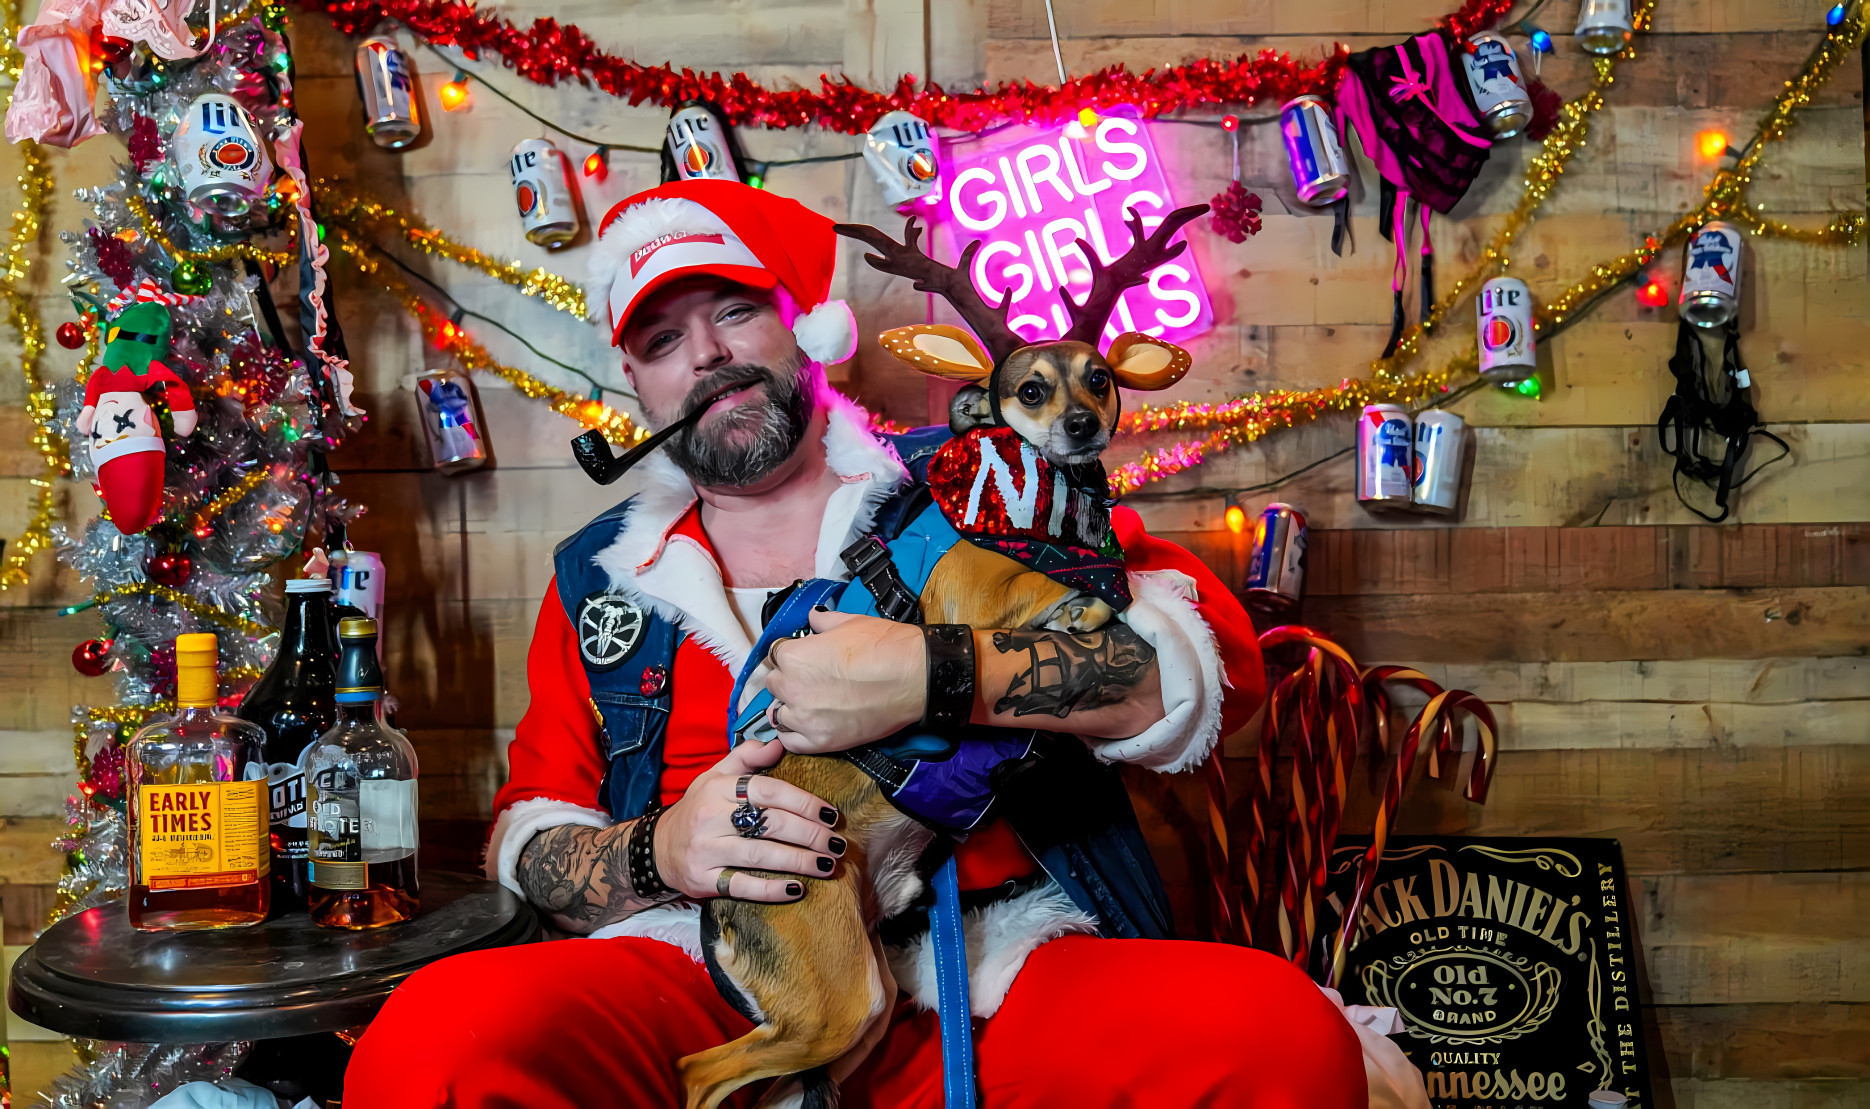 Merry Christmas! from Ziggy and Bad Santa